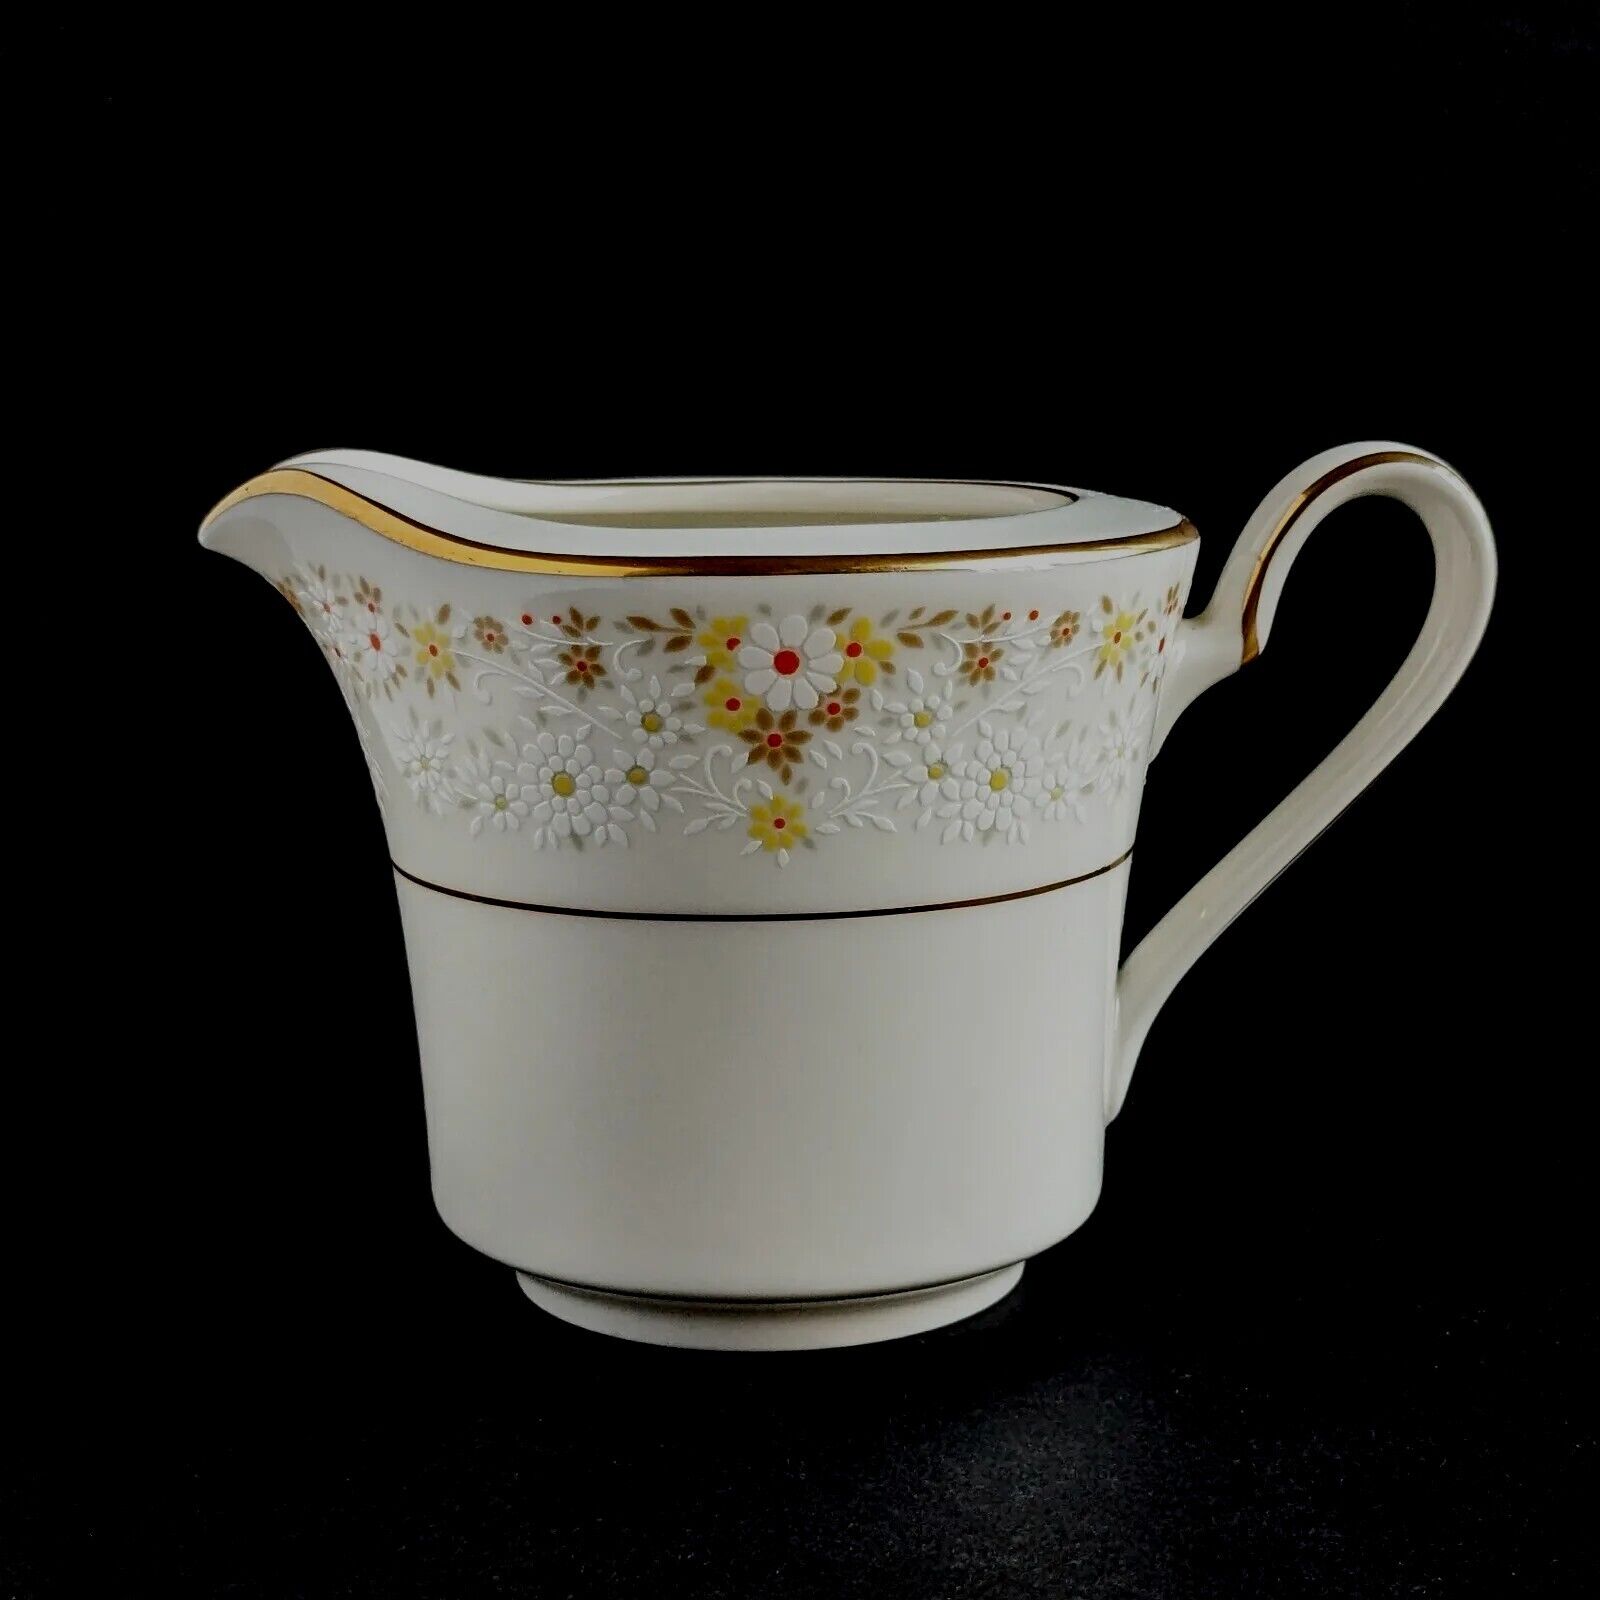 VTG Noritake China Fragrance Pattern Creamer Excellent Condition 3.2 Inches Tall